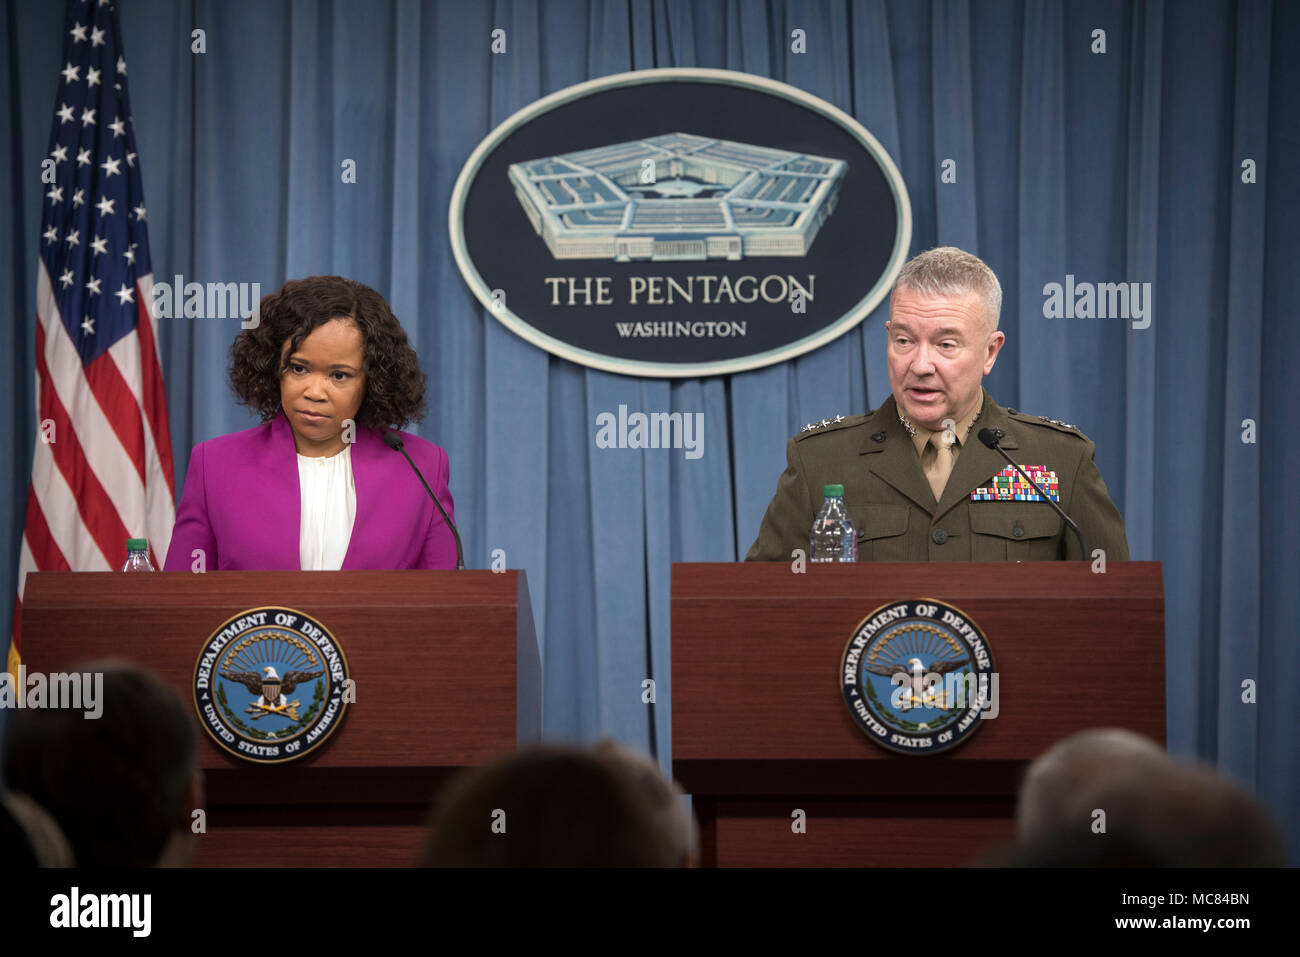 Dana White, the assistant to the secretary of defense for public affairs, and Lt. Gen. Kenneth F. McKenzie, the Joint Staff director, brief the press regarding American operations in Syria at the Pentagon in Washington, D.C., April 14, 2018. (DoD photo by Tech Sgt. Vernon Young Jr.) Stock Photo